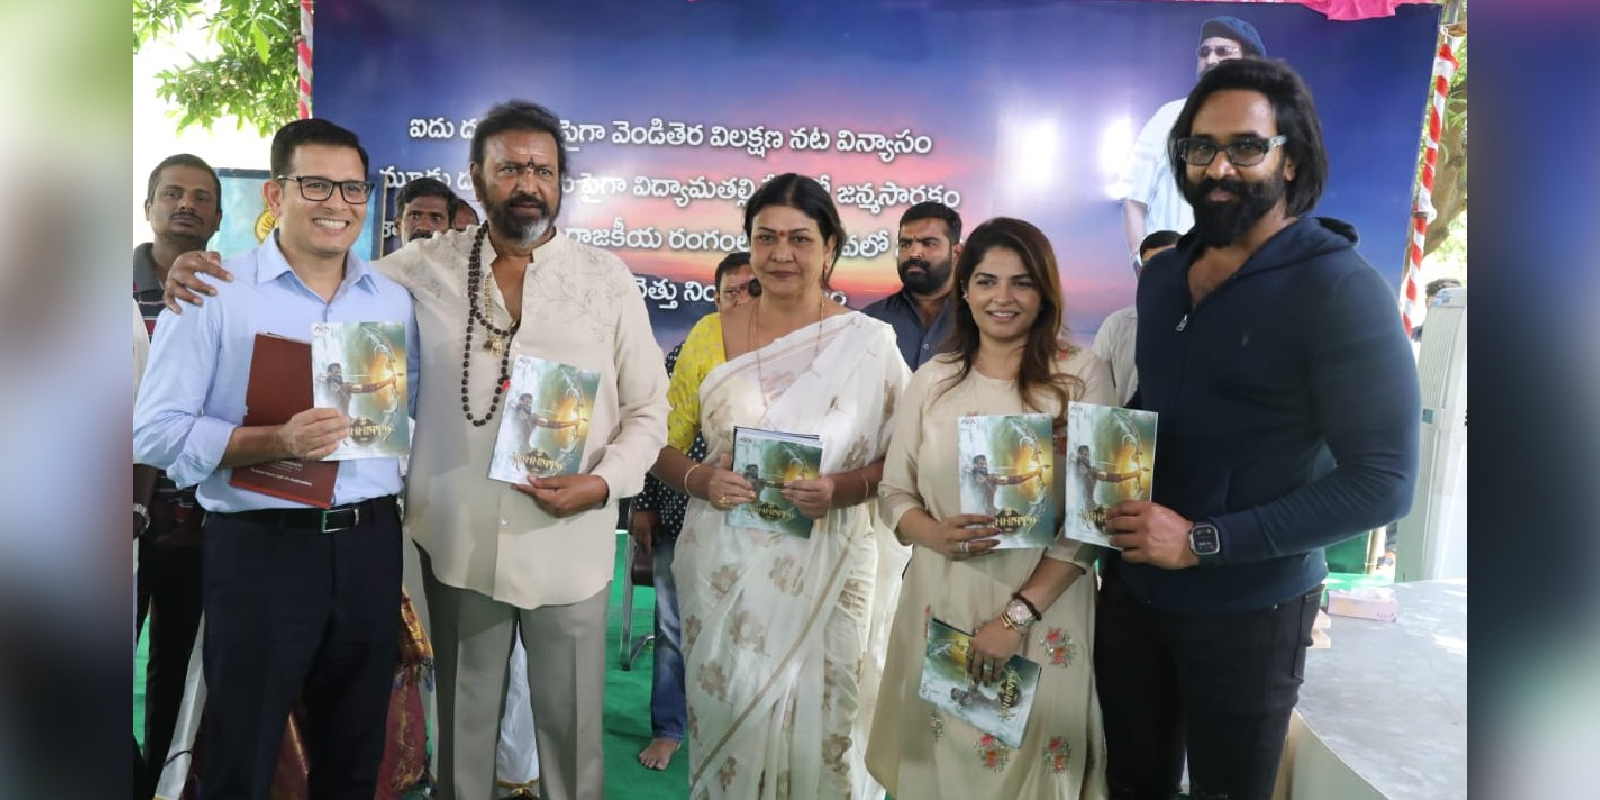 First volume of Kannappa comic book launched